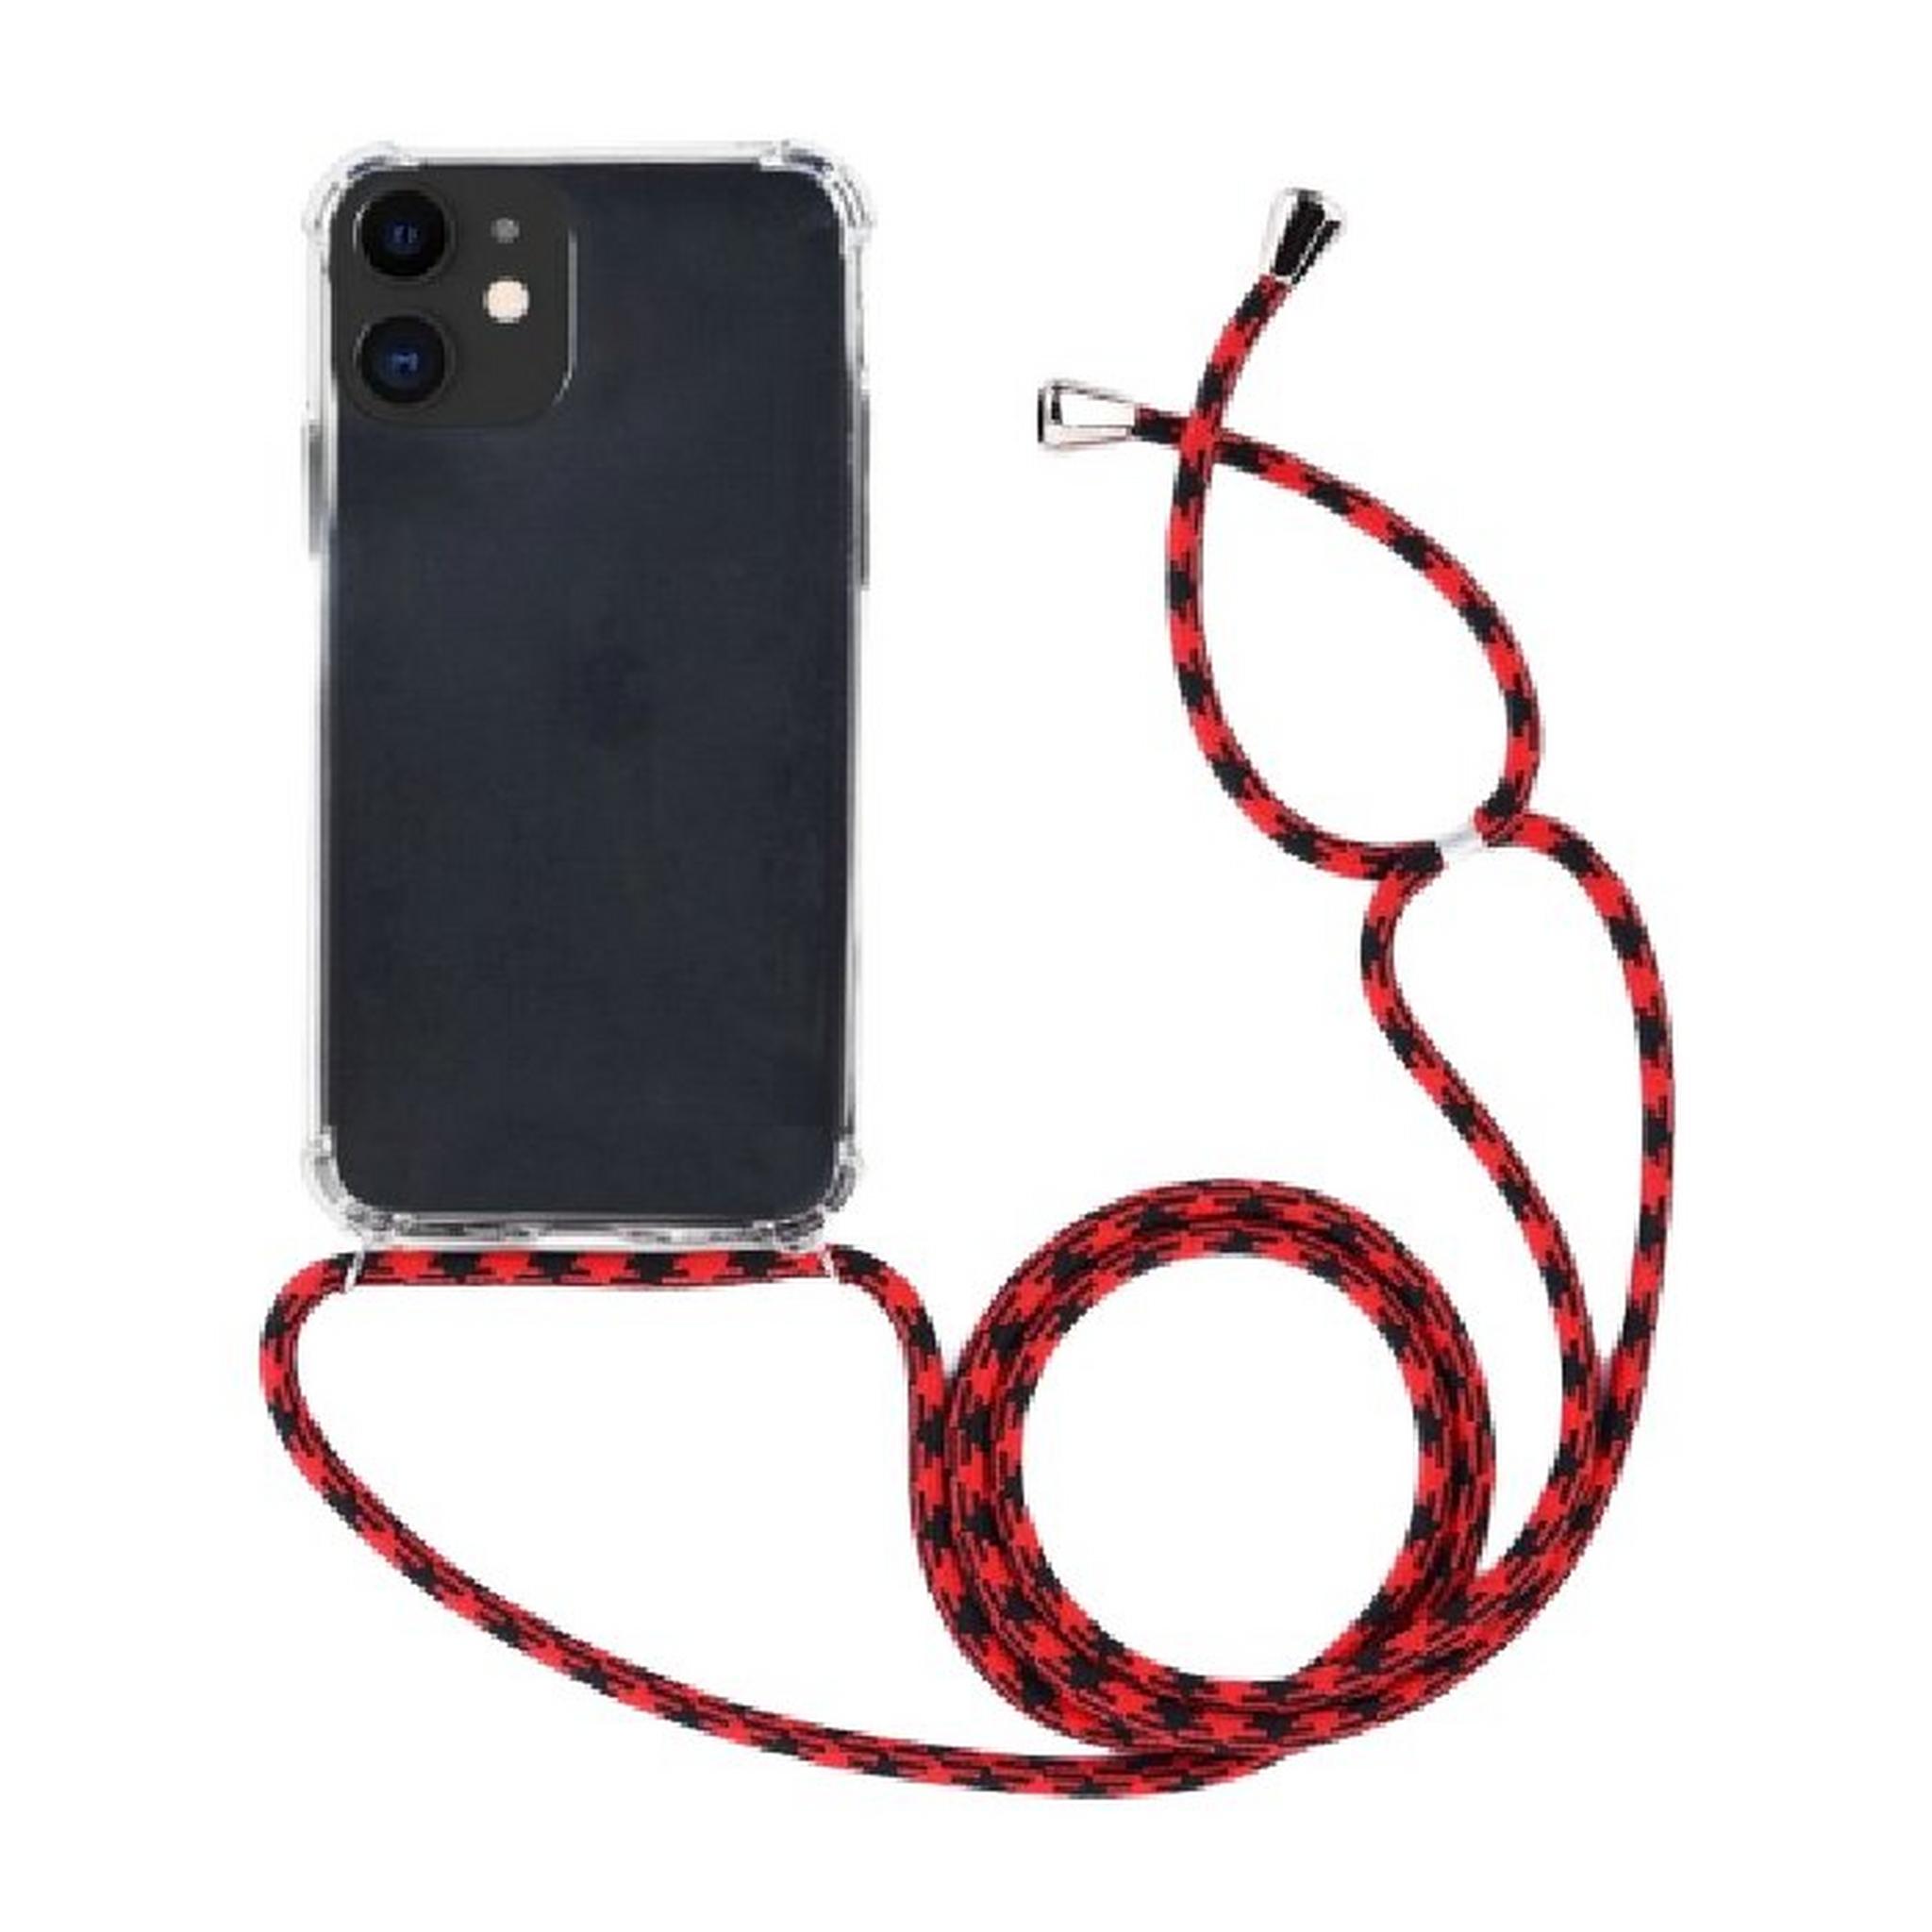 EQ Necklace String iPhone 11 Case - Red Strap